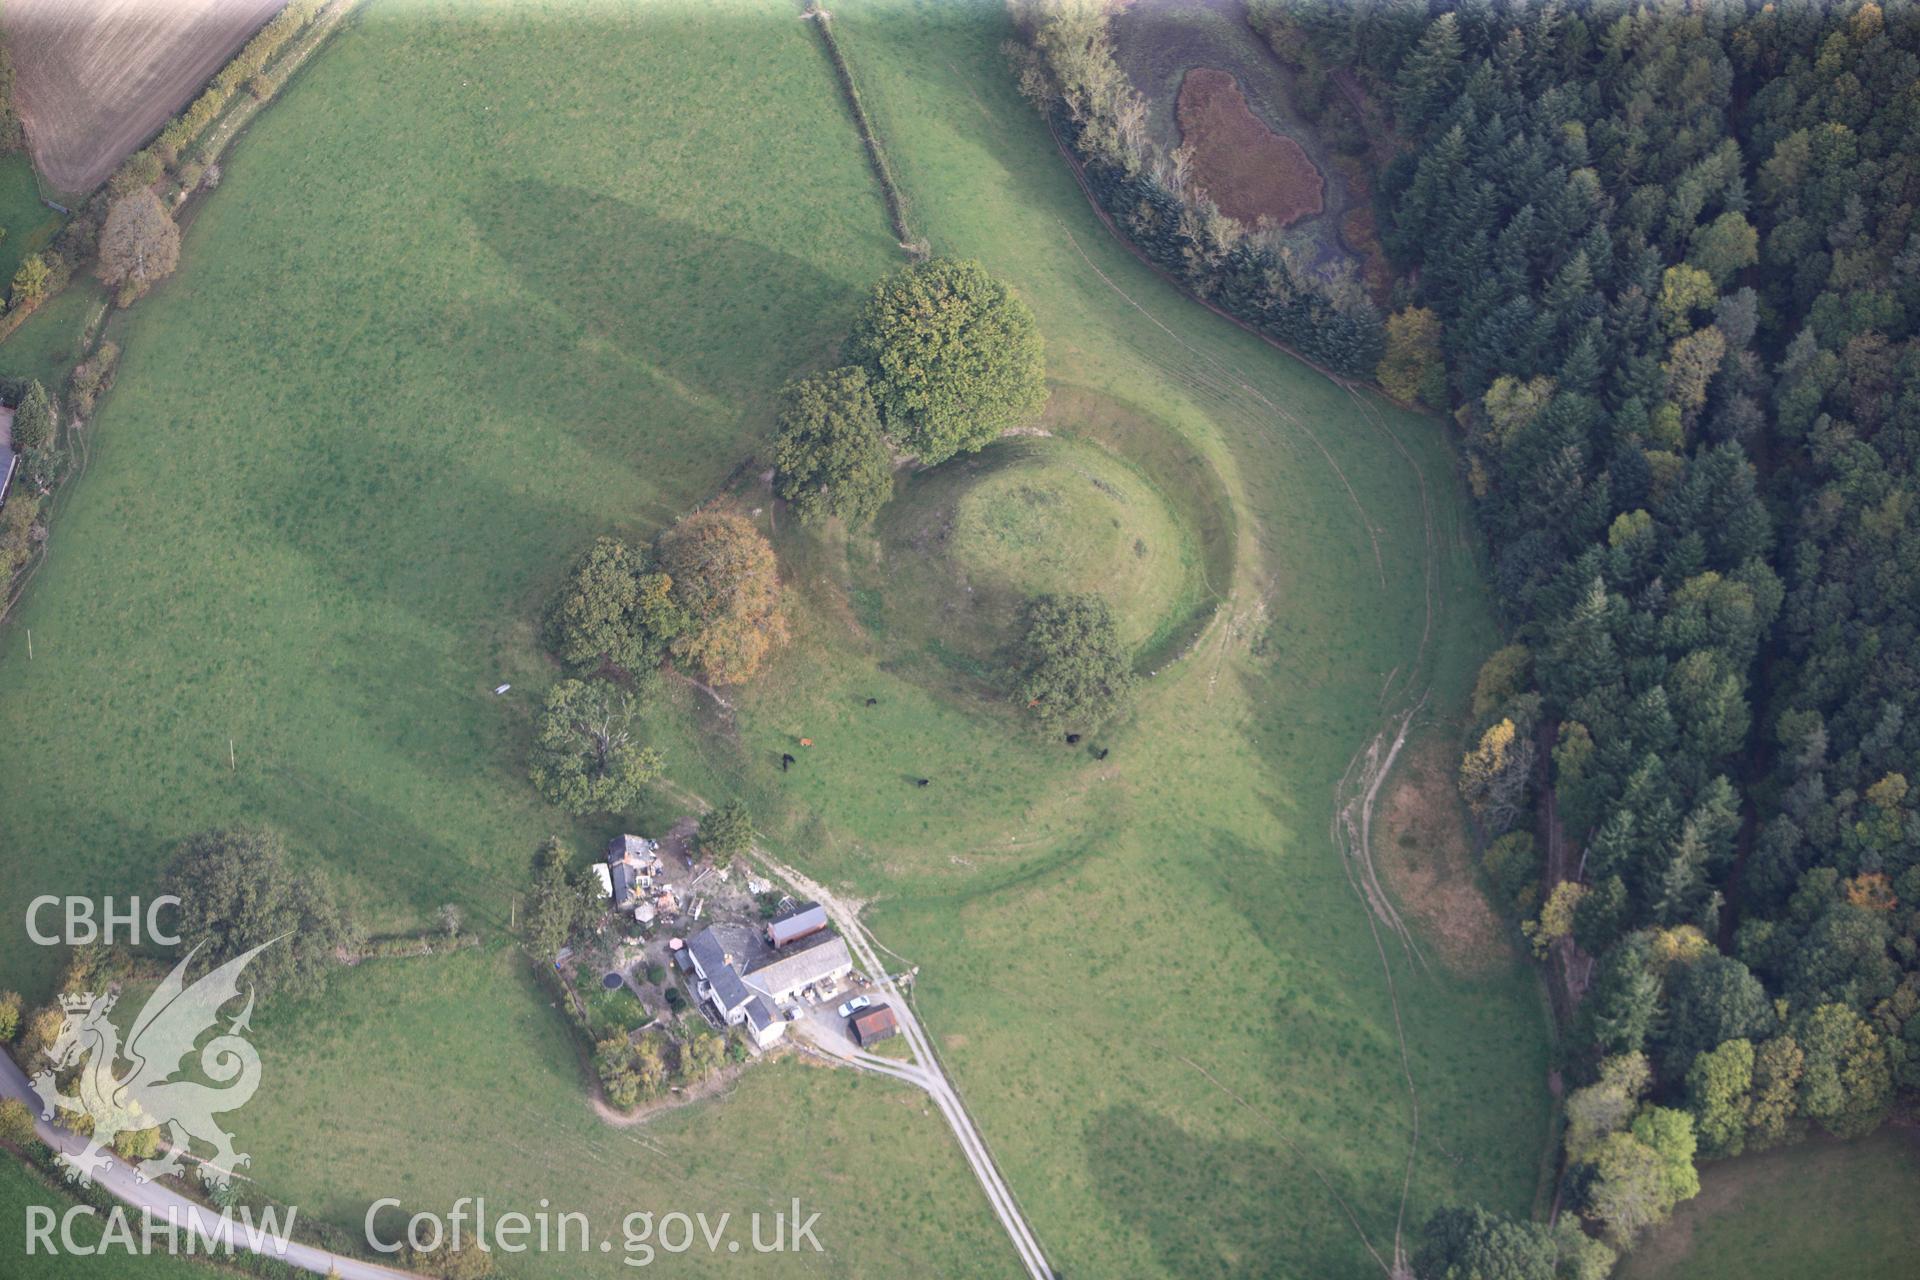 RCAHMW colour oblique photograph of Sycharth Castle, Llansilin, Sycarth Castle. Taken by Toby Driver on 04/10/2011.